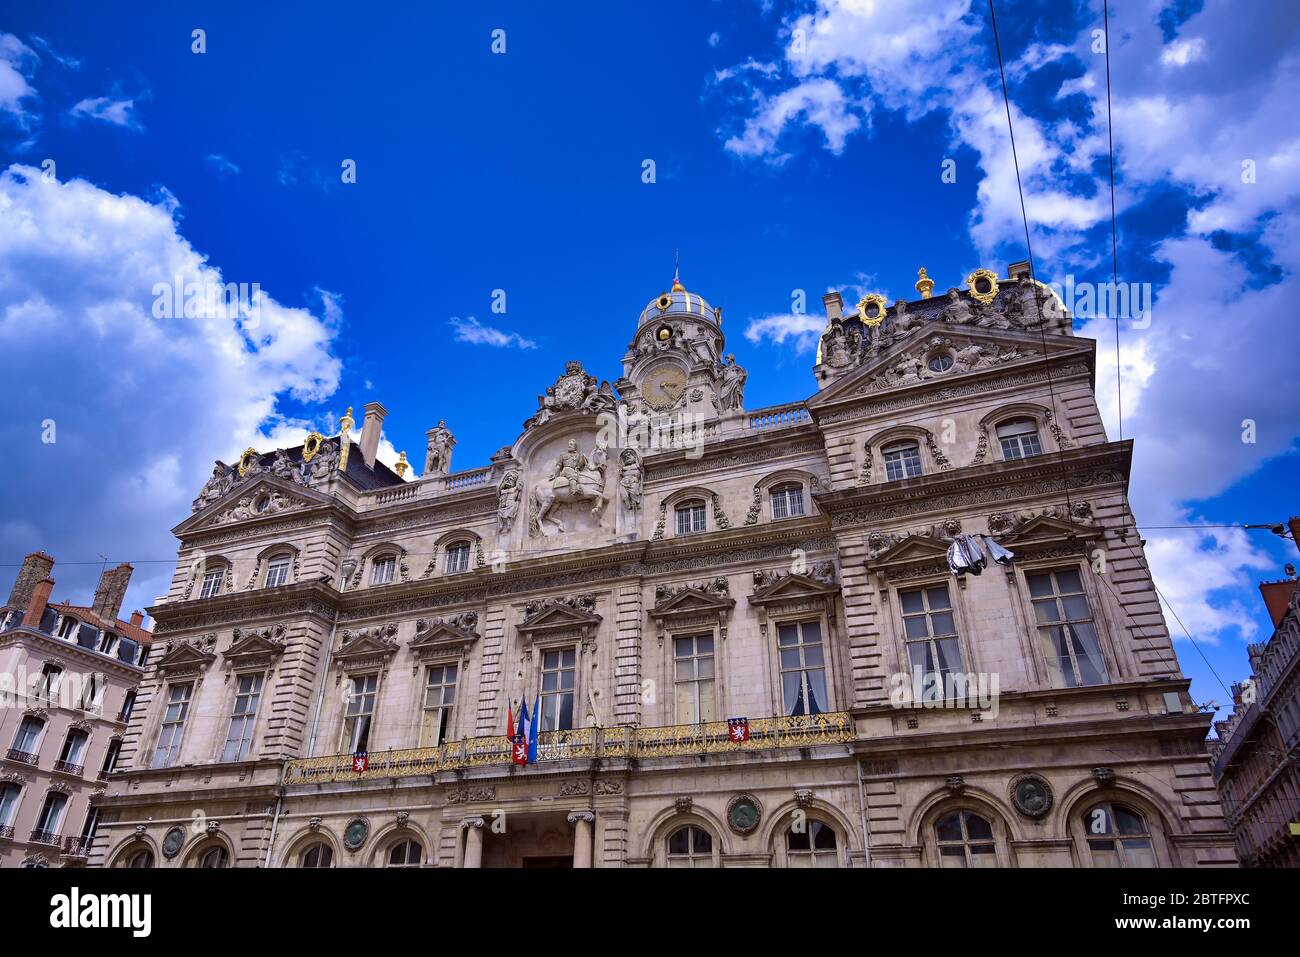 The Hotel de Ville, the city hall of Lyon, France, on a sunny day. Stock Photo